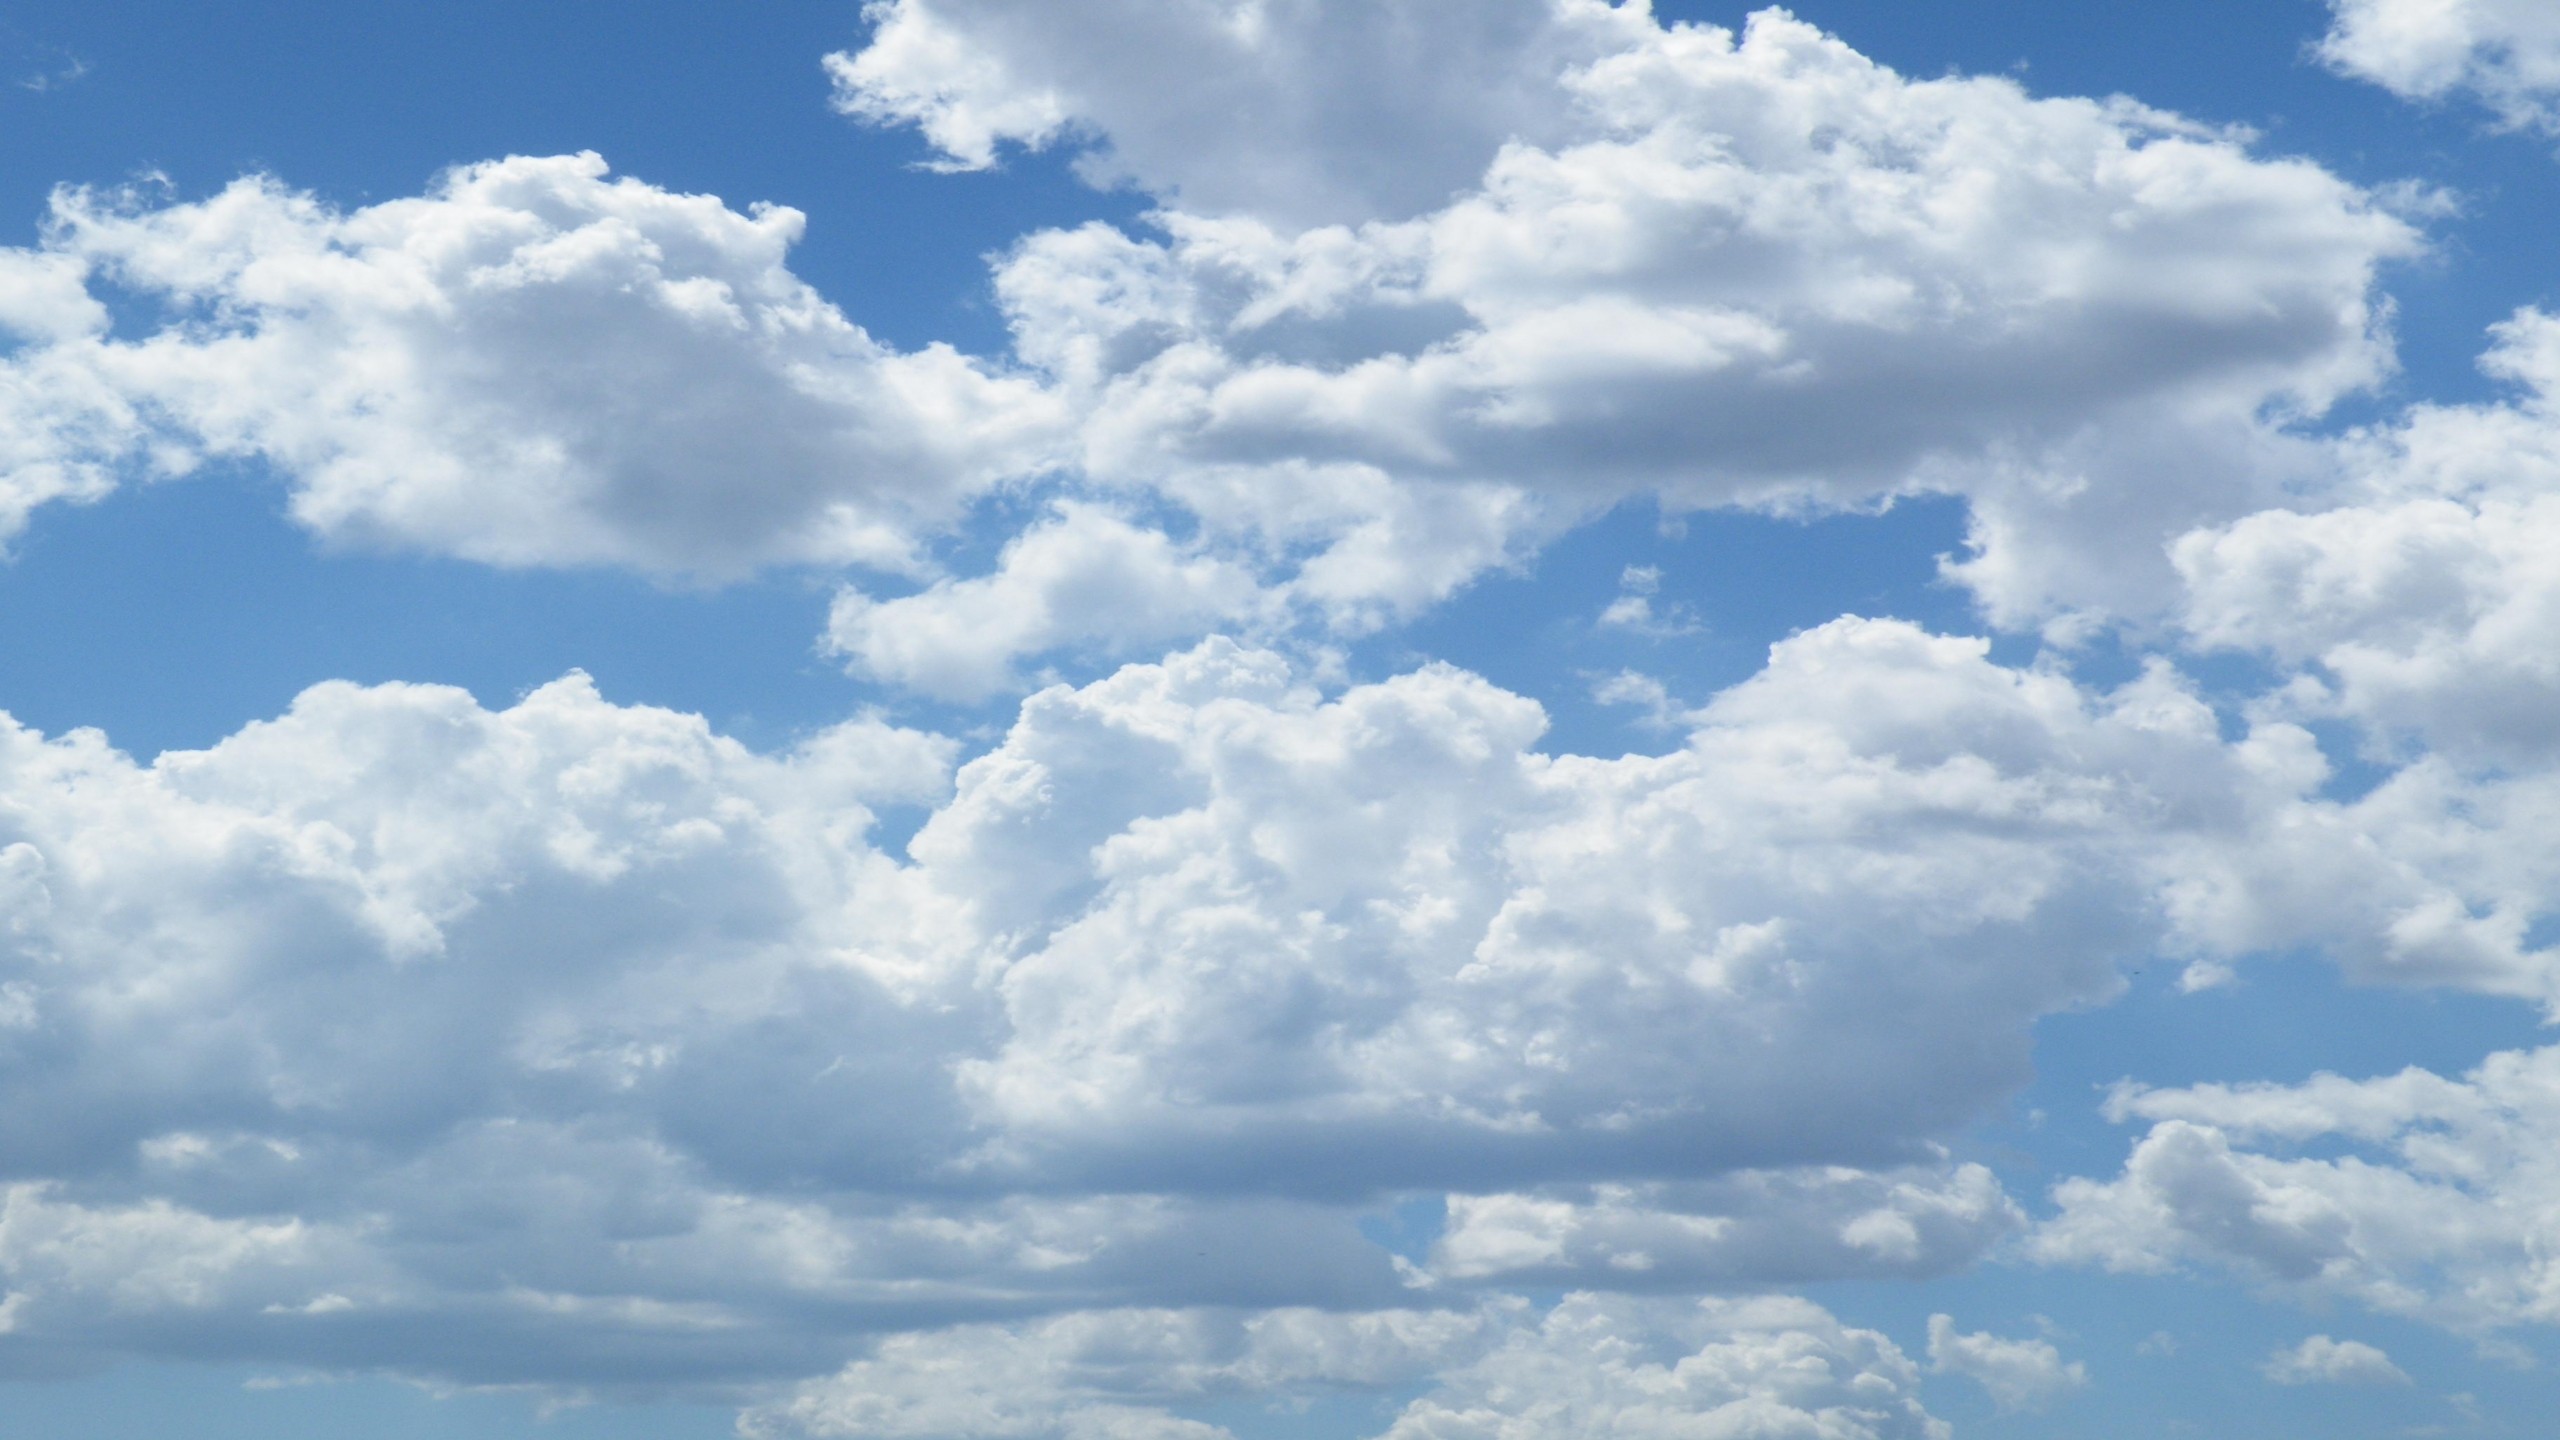 Cloud wallpaper ·① Download free High Resolution backgrounds for